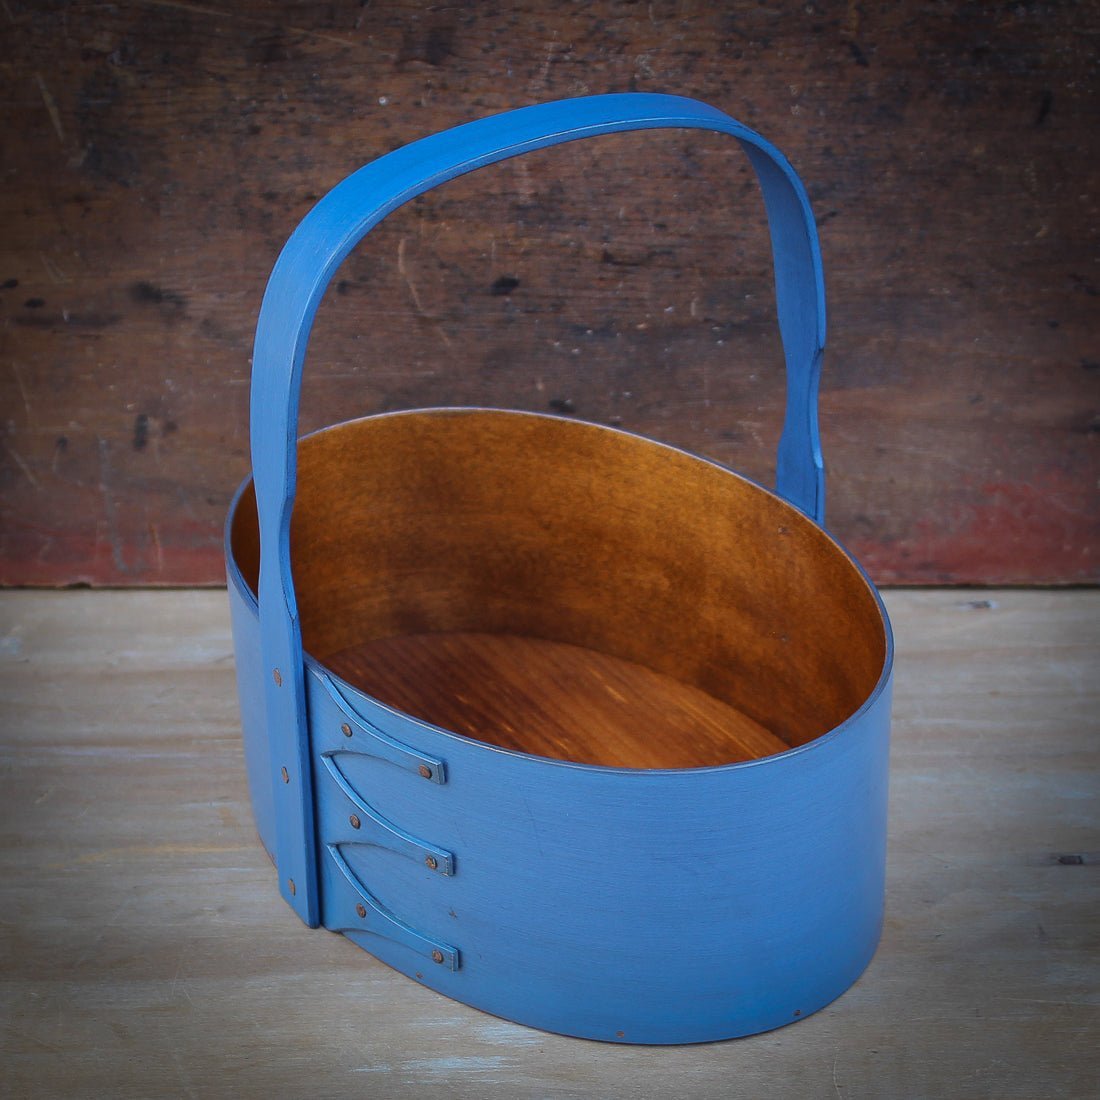 Shaker Carrier, Size #4, LeHays Shaker Boxes, Handcrafted in Maine, Blue Milk Paint Finish, Side View